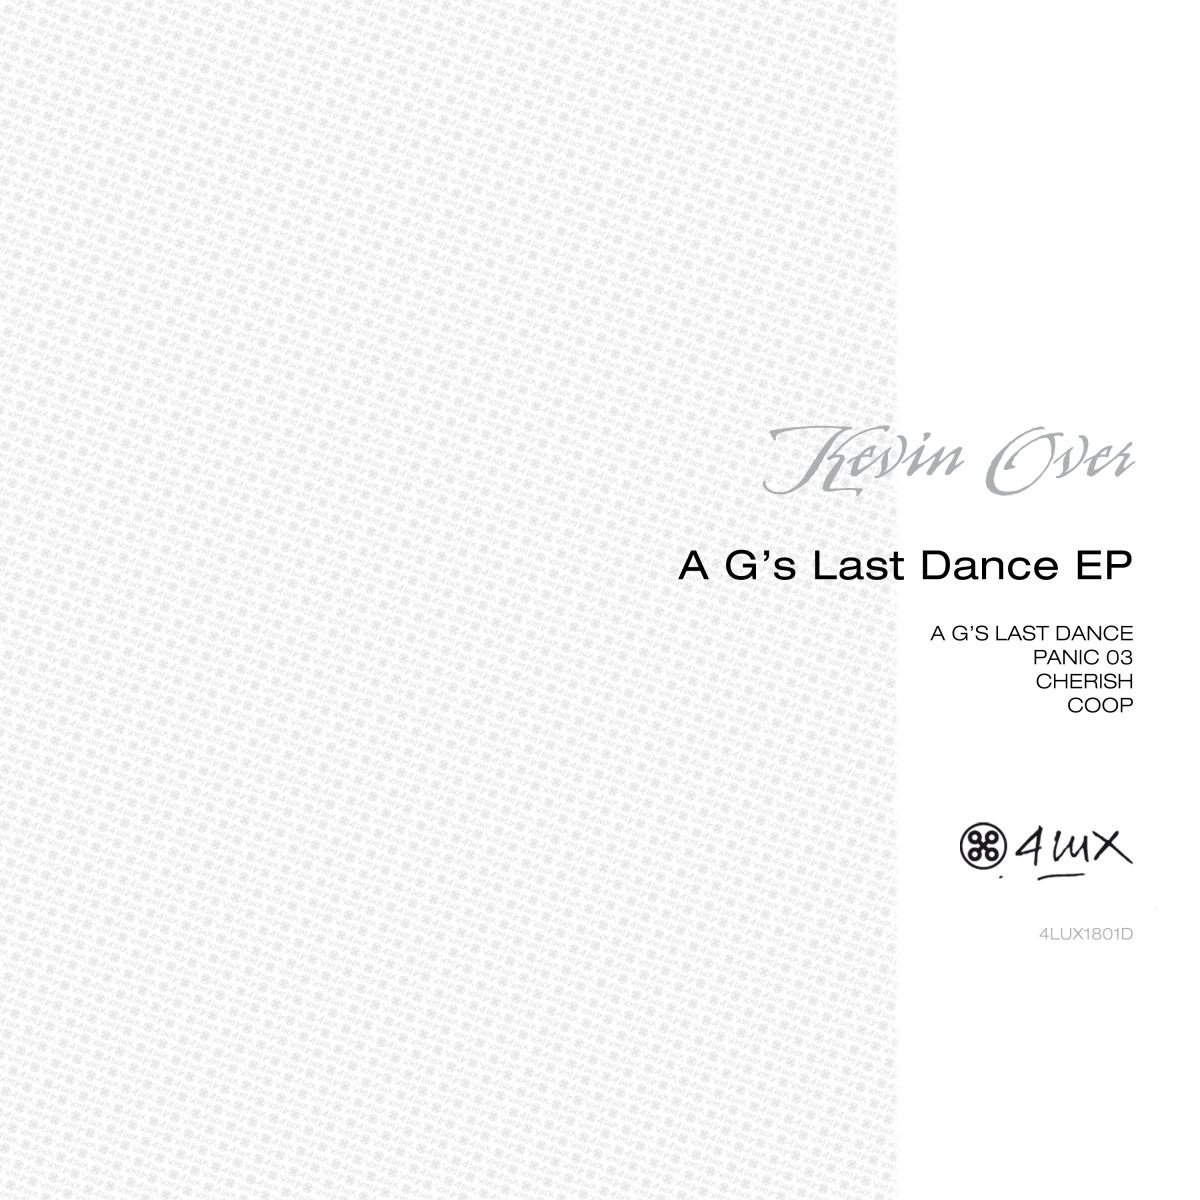 Kevin Over - A G's Last Dance EP / 4lux Black